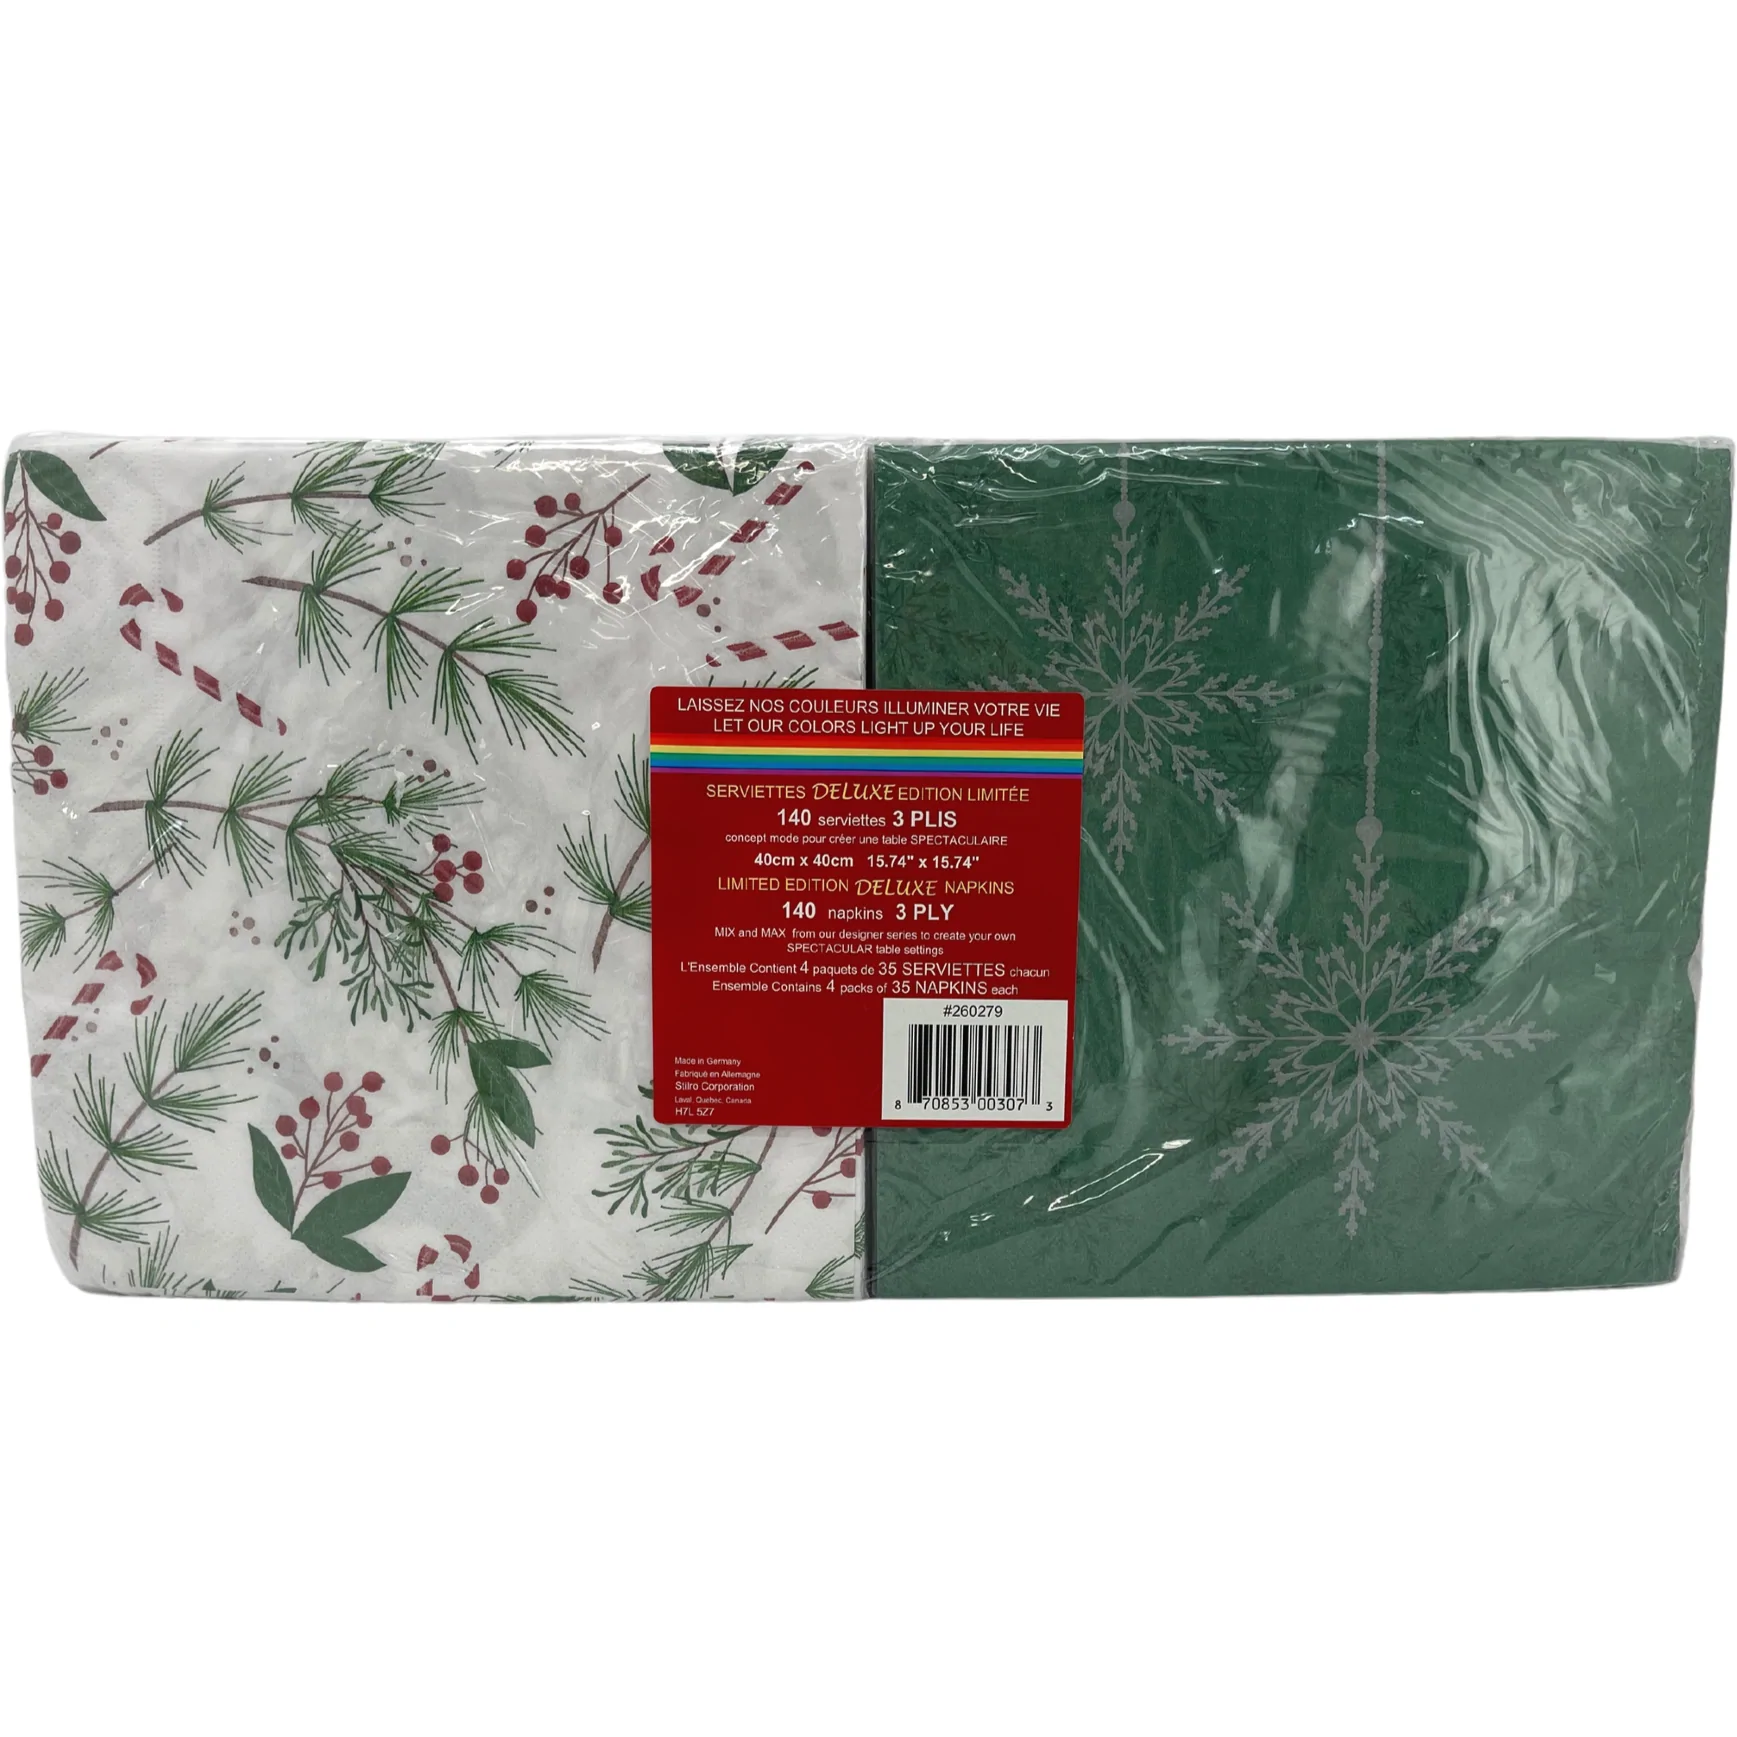 Holiday Napkins / 4 Packs / Green, Red, White & Grey / 140 Napkins / 3 Ply